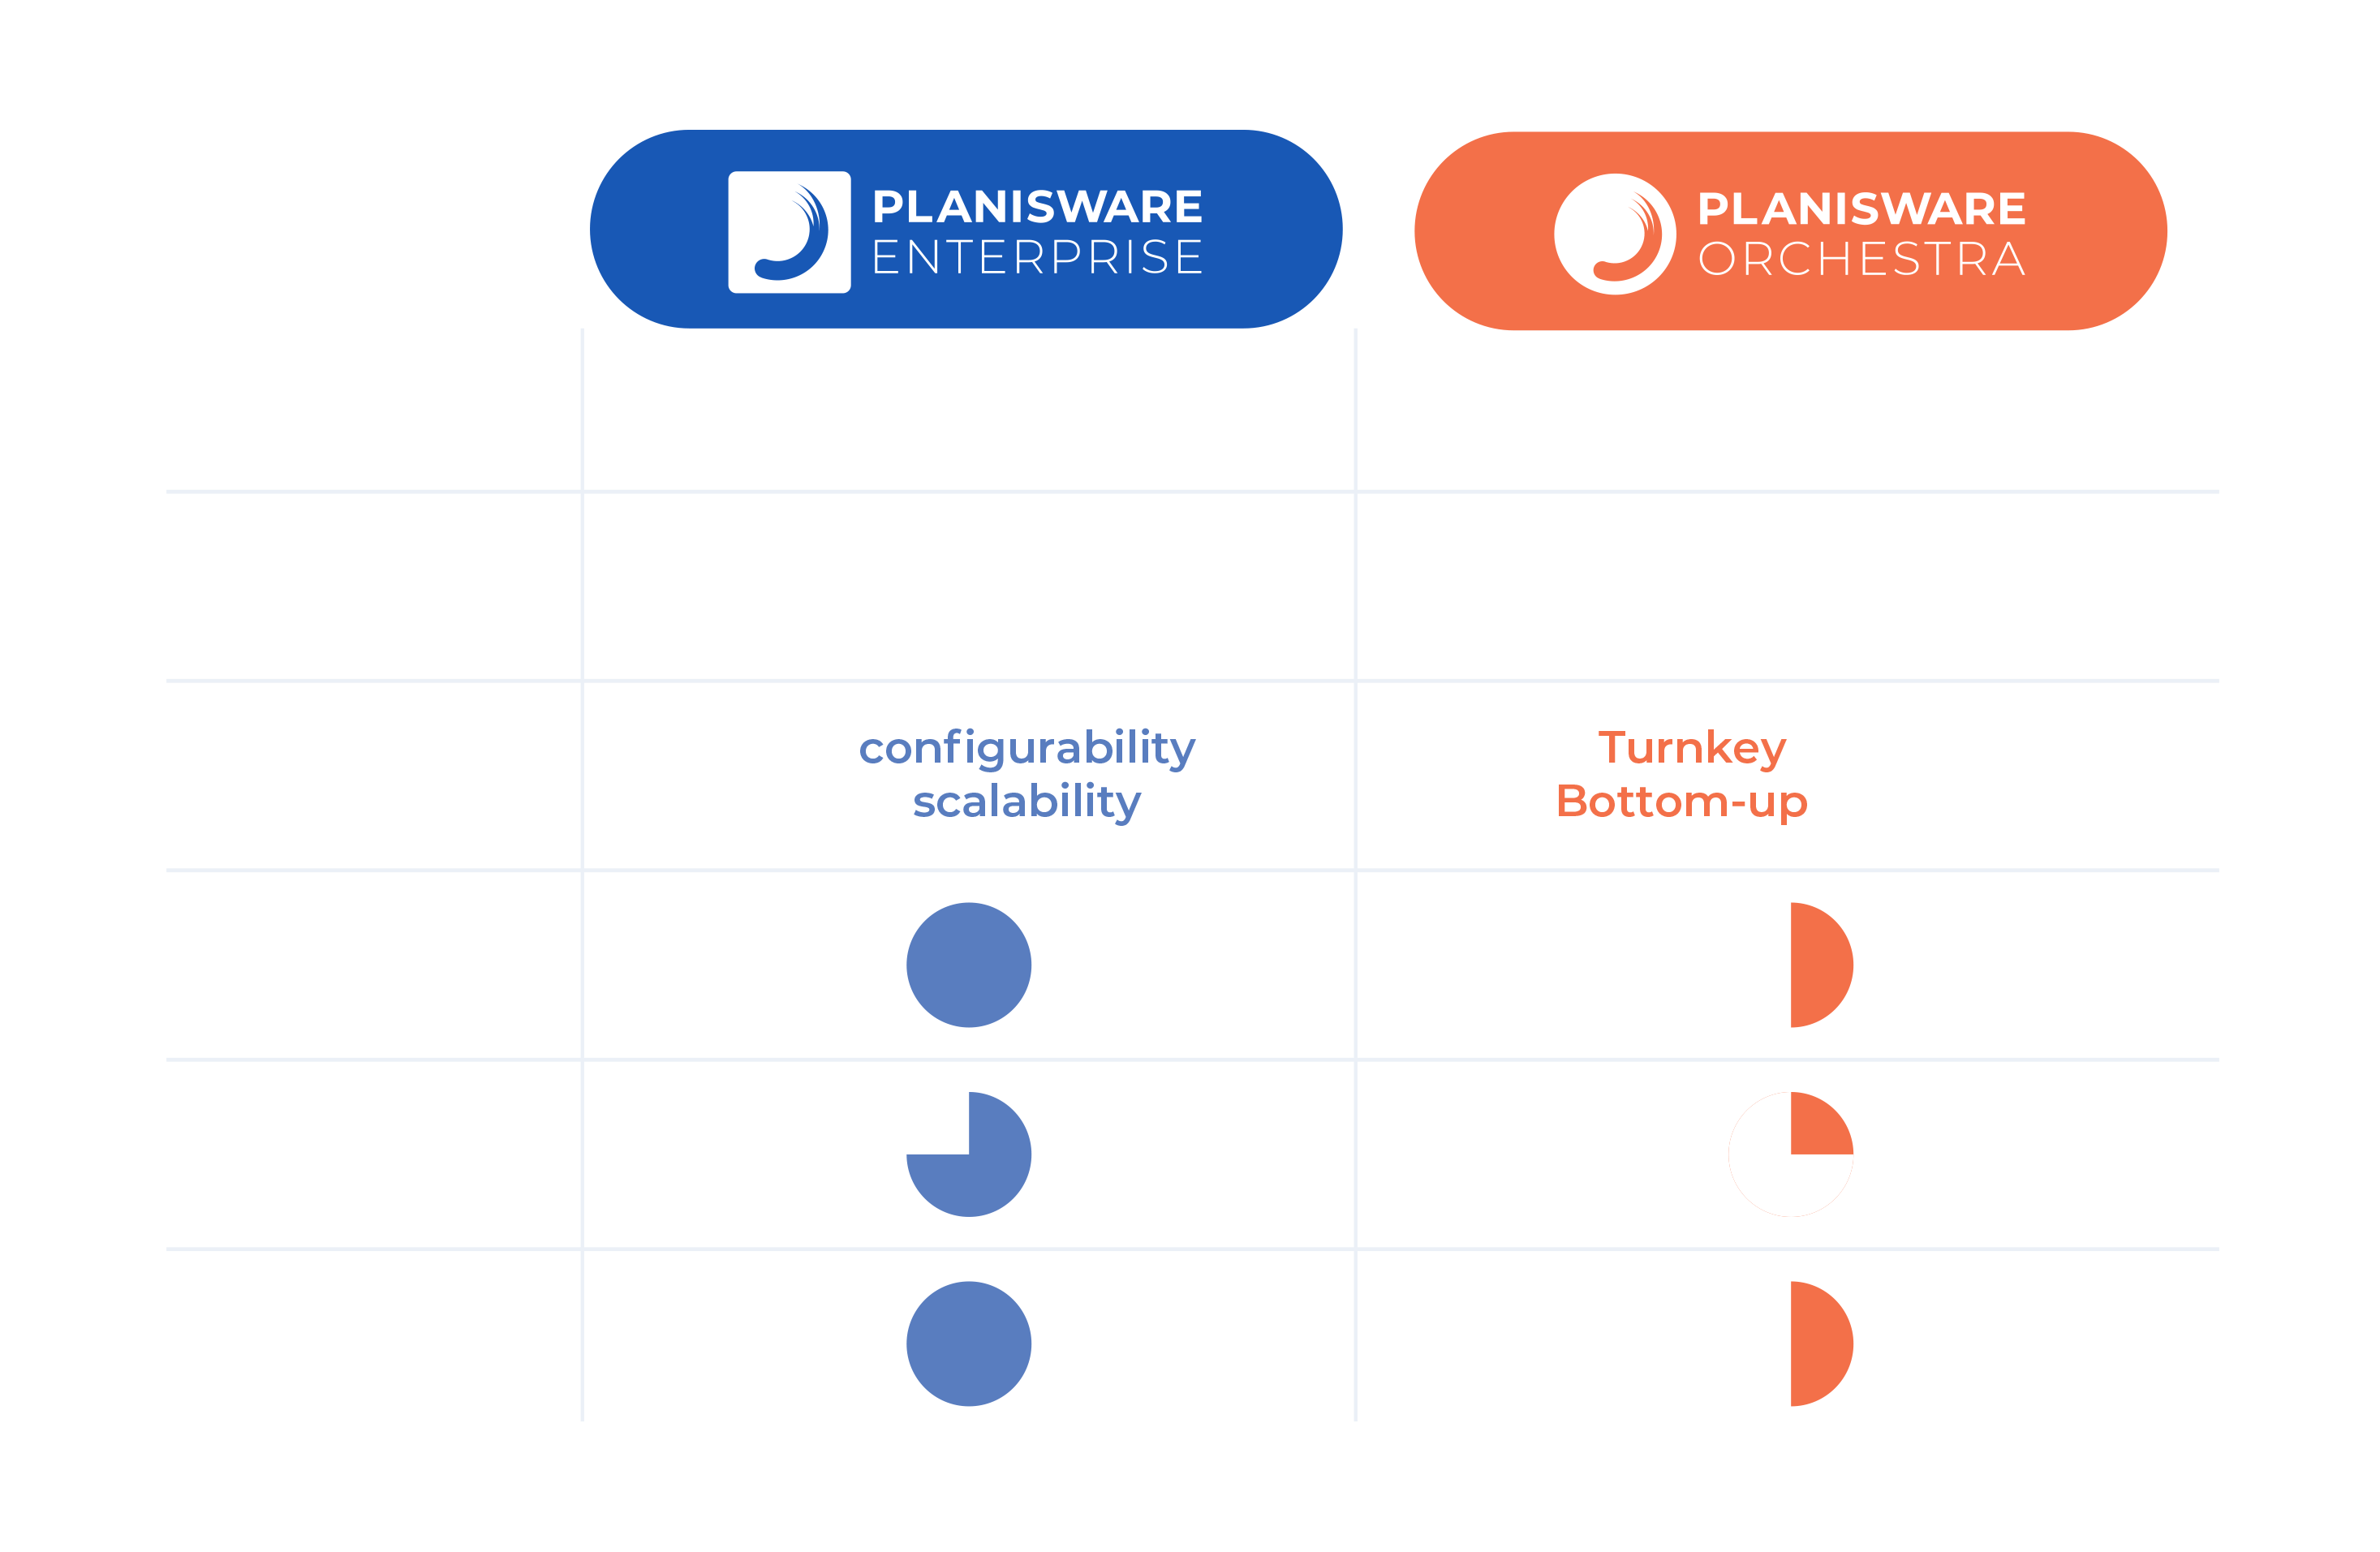 Planisware's solutions provide a strategic pathway for organizations at all stages to achieve advanced PPM maturity.